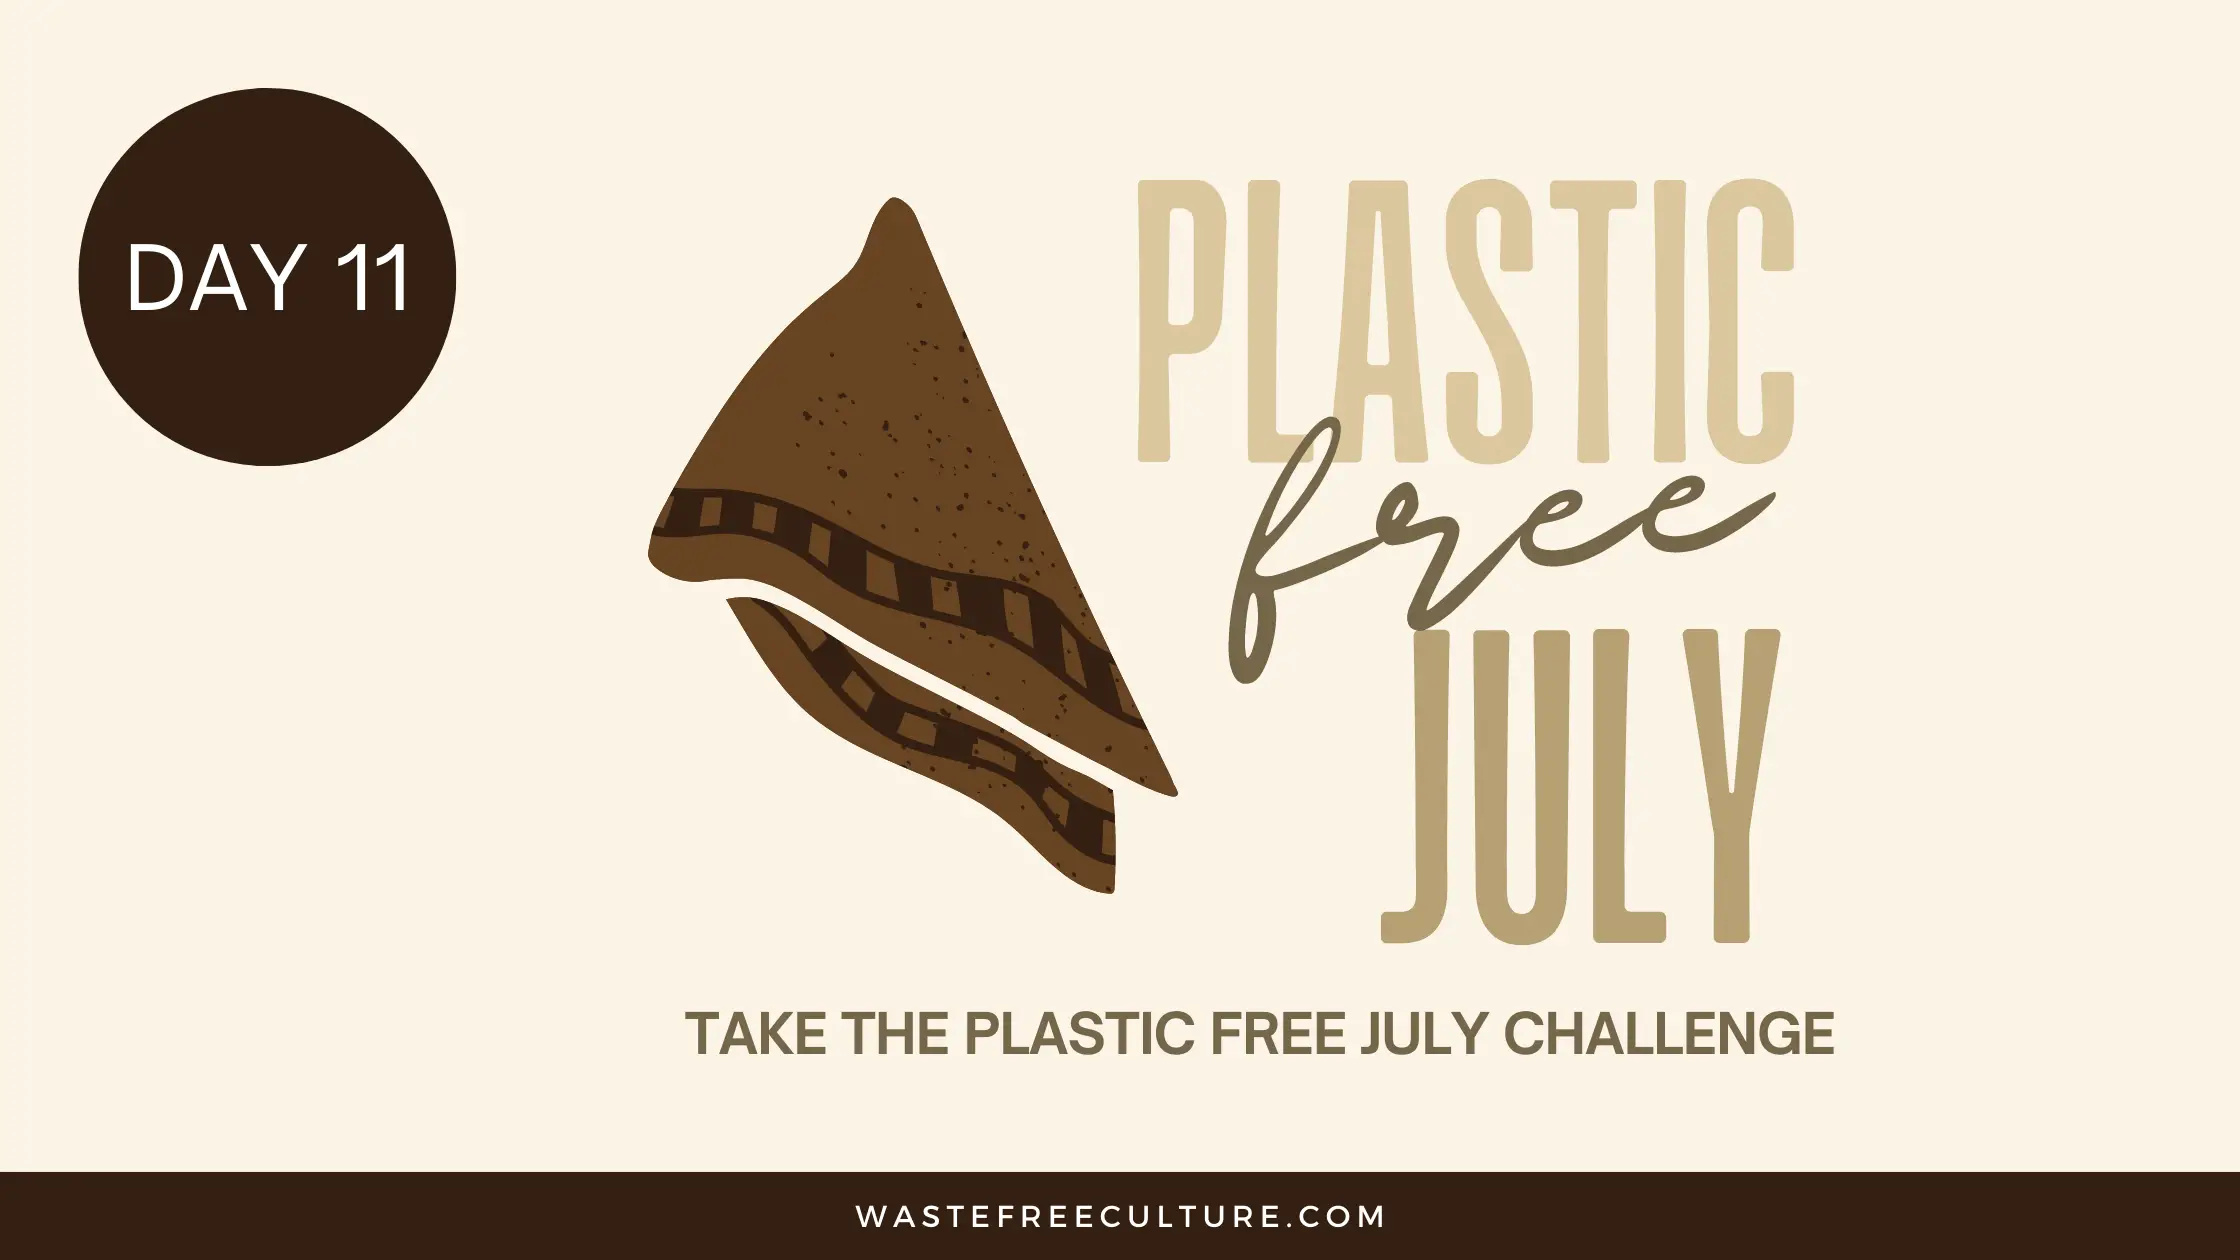 Day 11 of the Plastic Free July Challenge